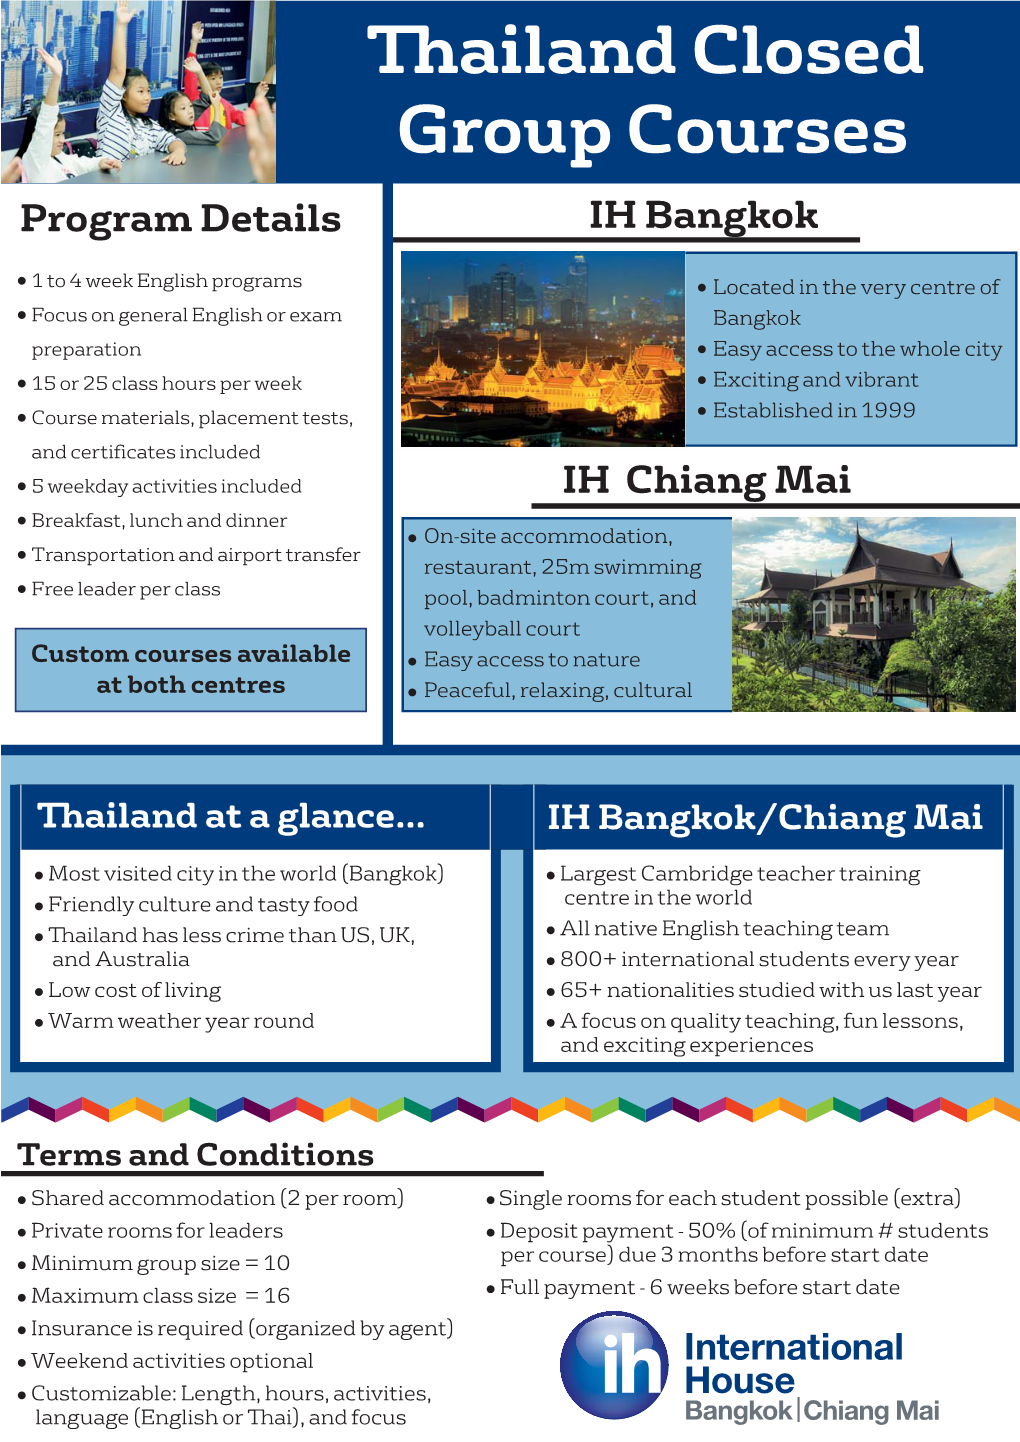 Thailand Closed Group Courses